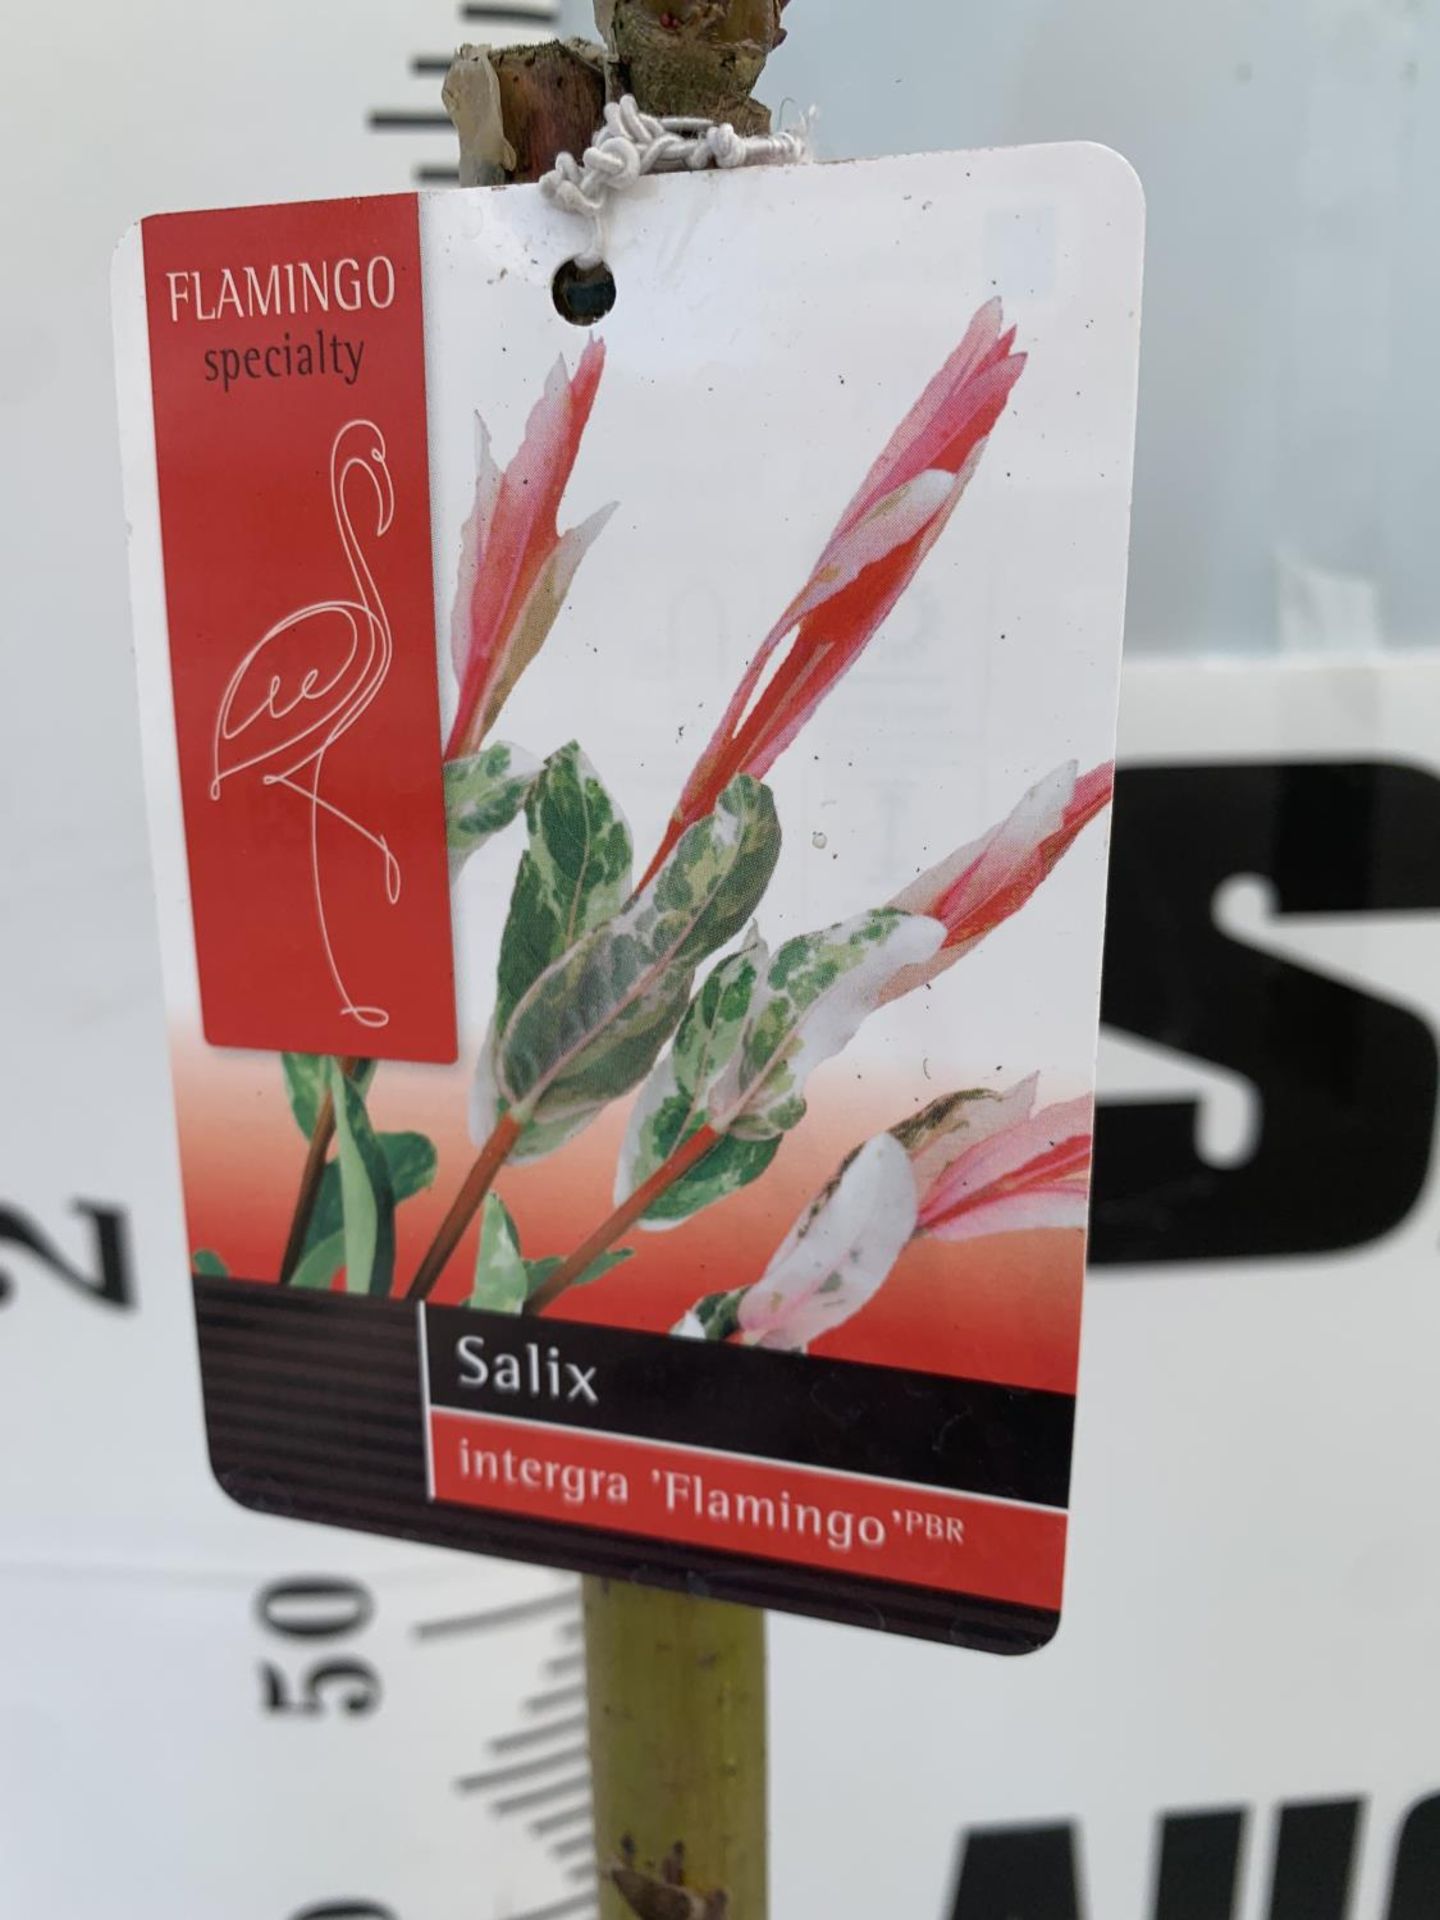 TWO STANDARD SALIX INTEGRA 'FLAMINGO' OVER 110CM IN HEIGHT IN 3 LTR POTS PLUS VAT TO BE SOLD FOR THE - Image 7 of 8